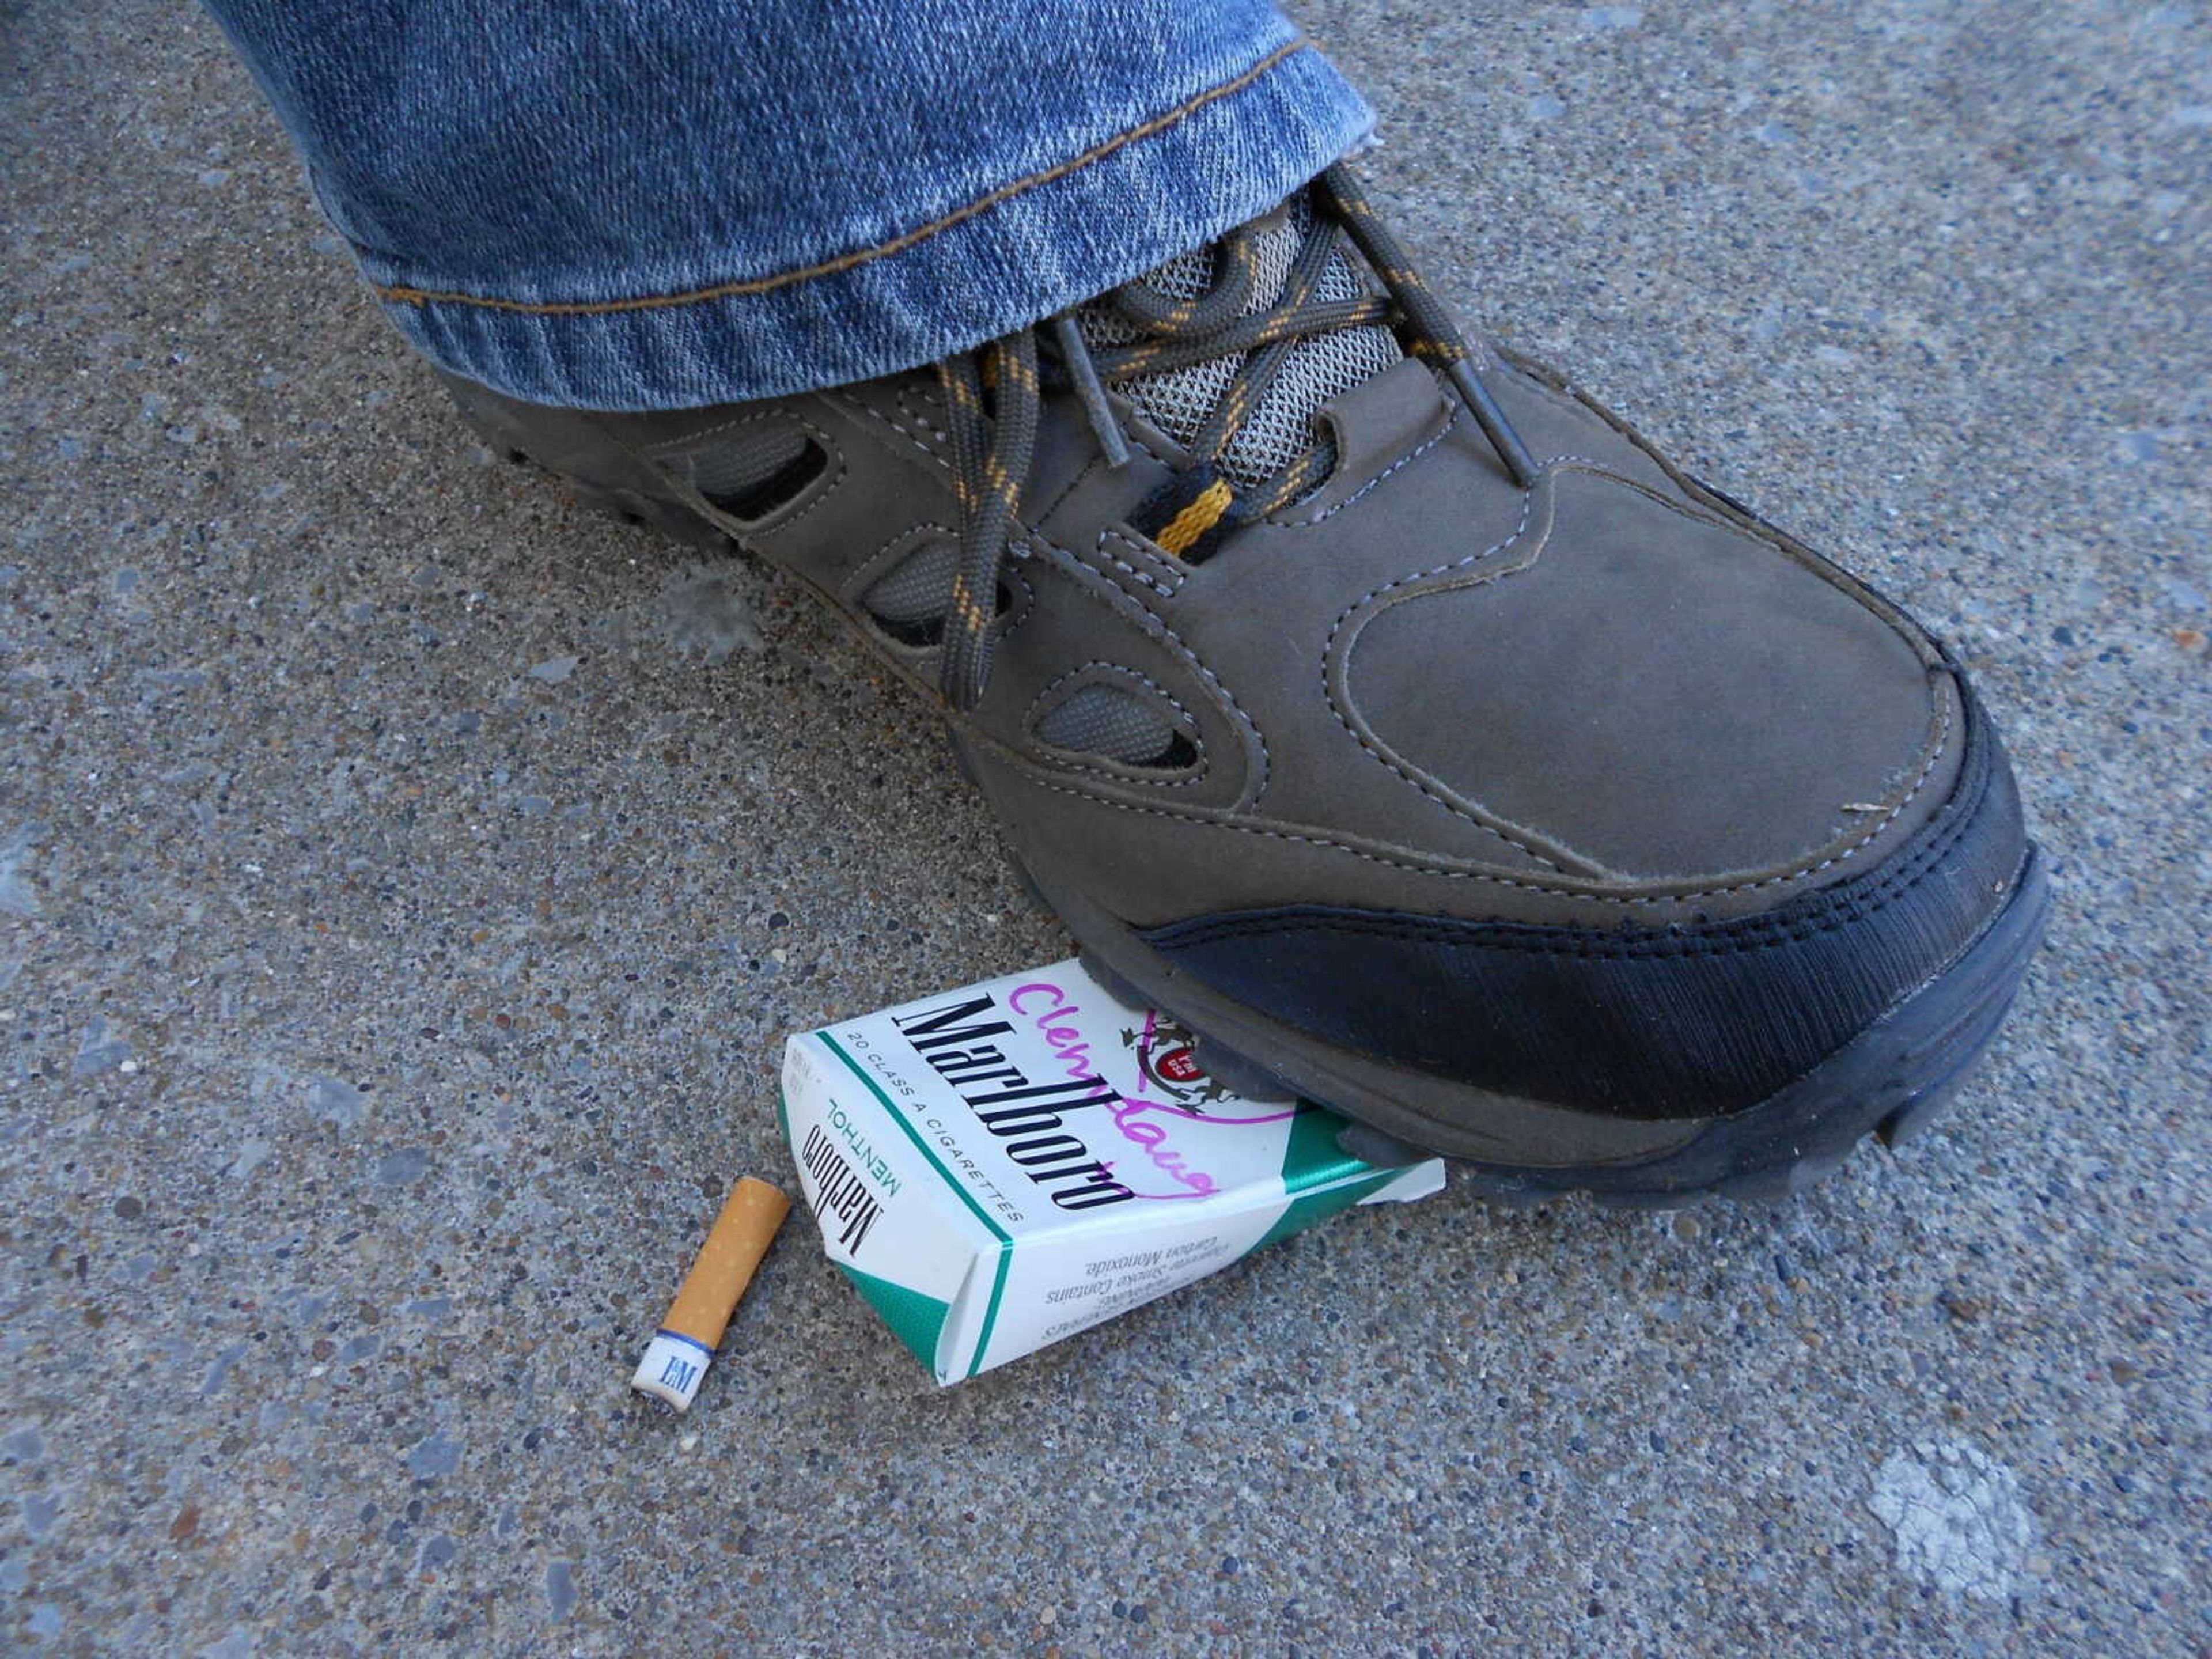 Campus program helps students quit smoking and nicotine habits